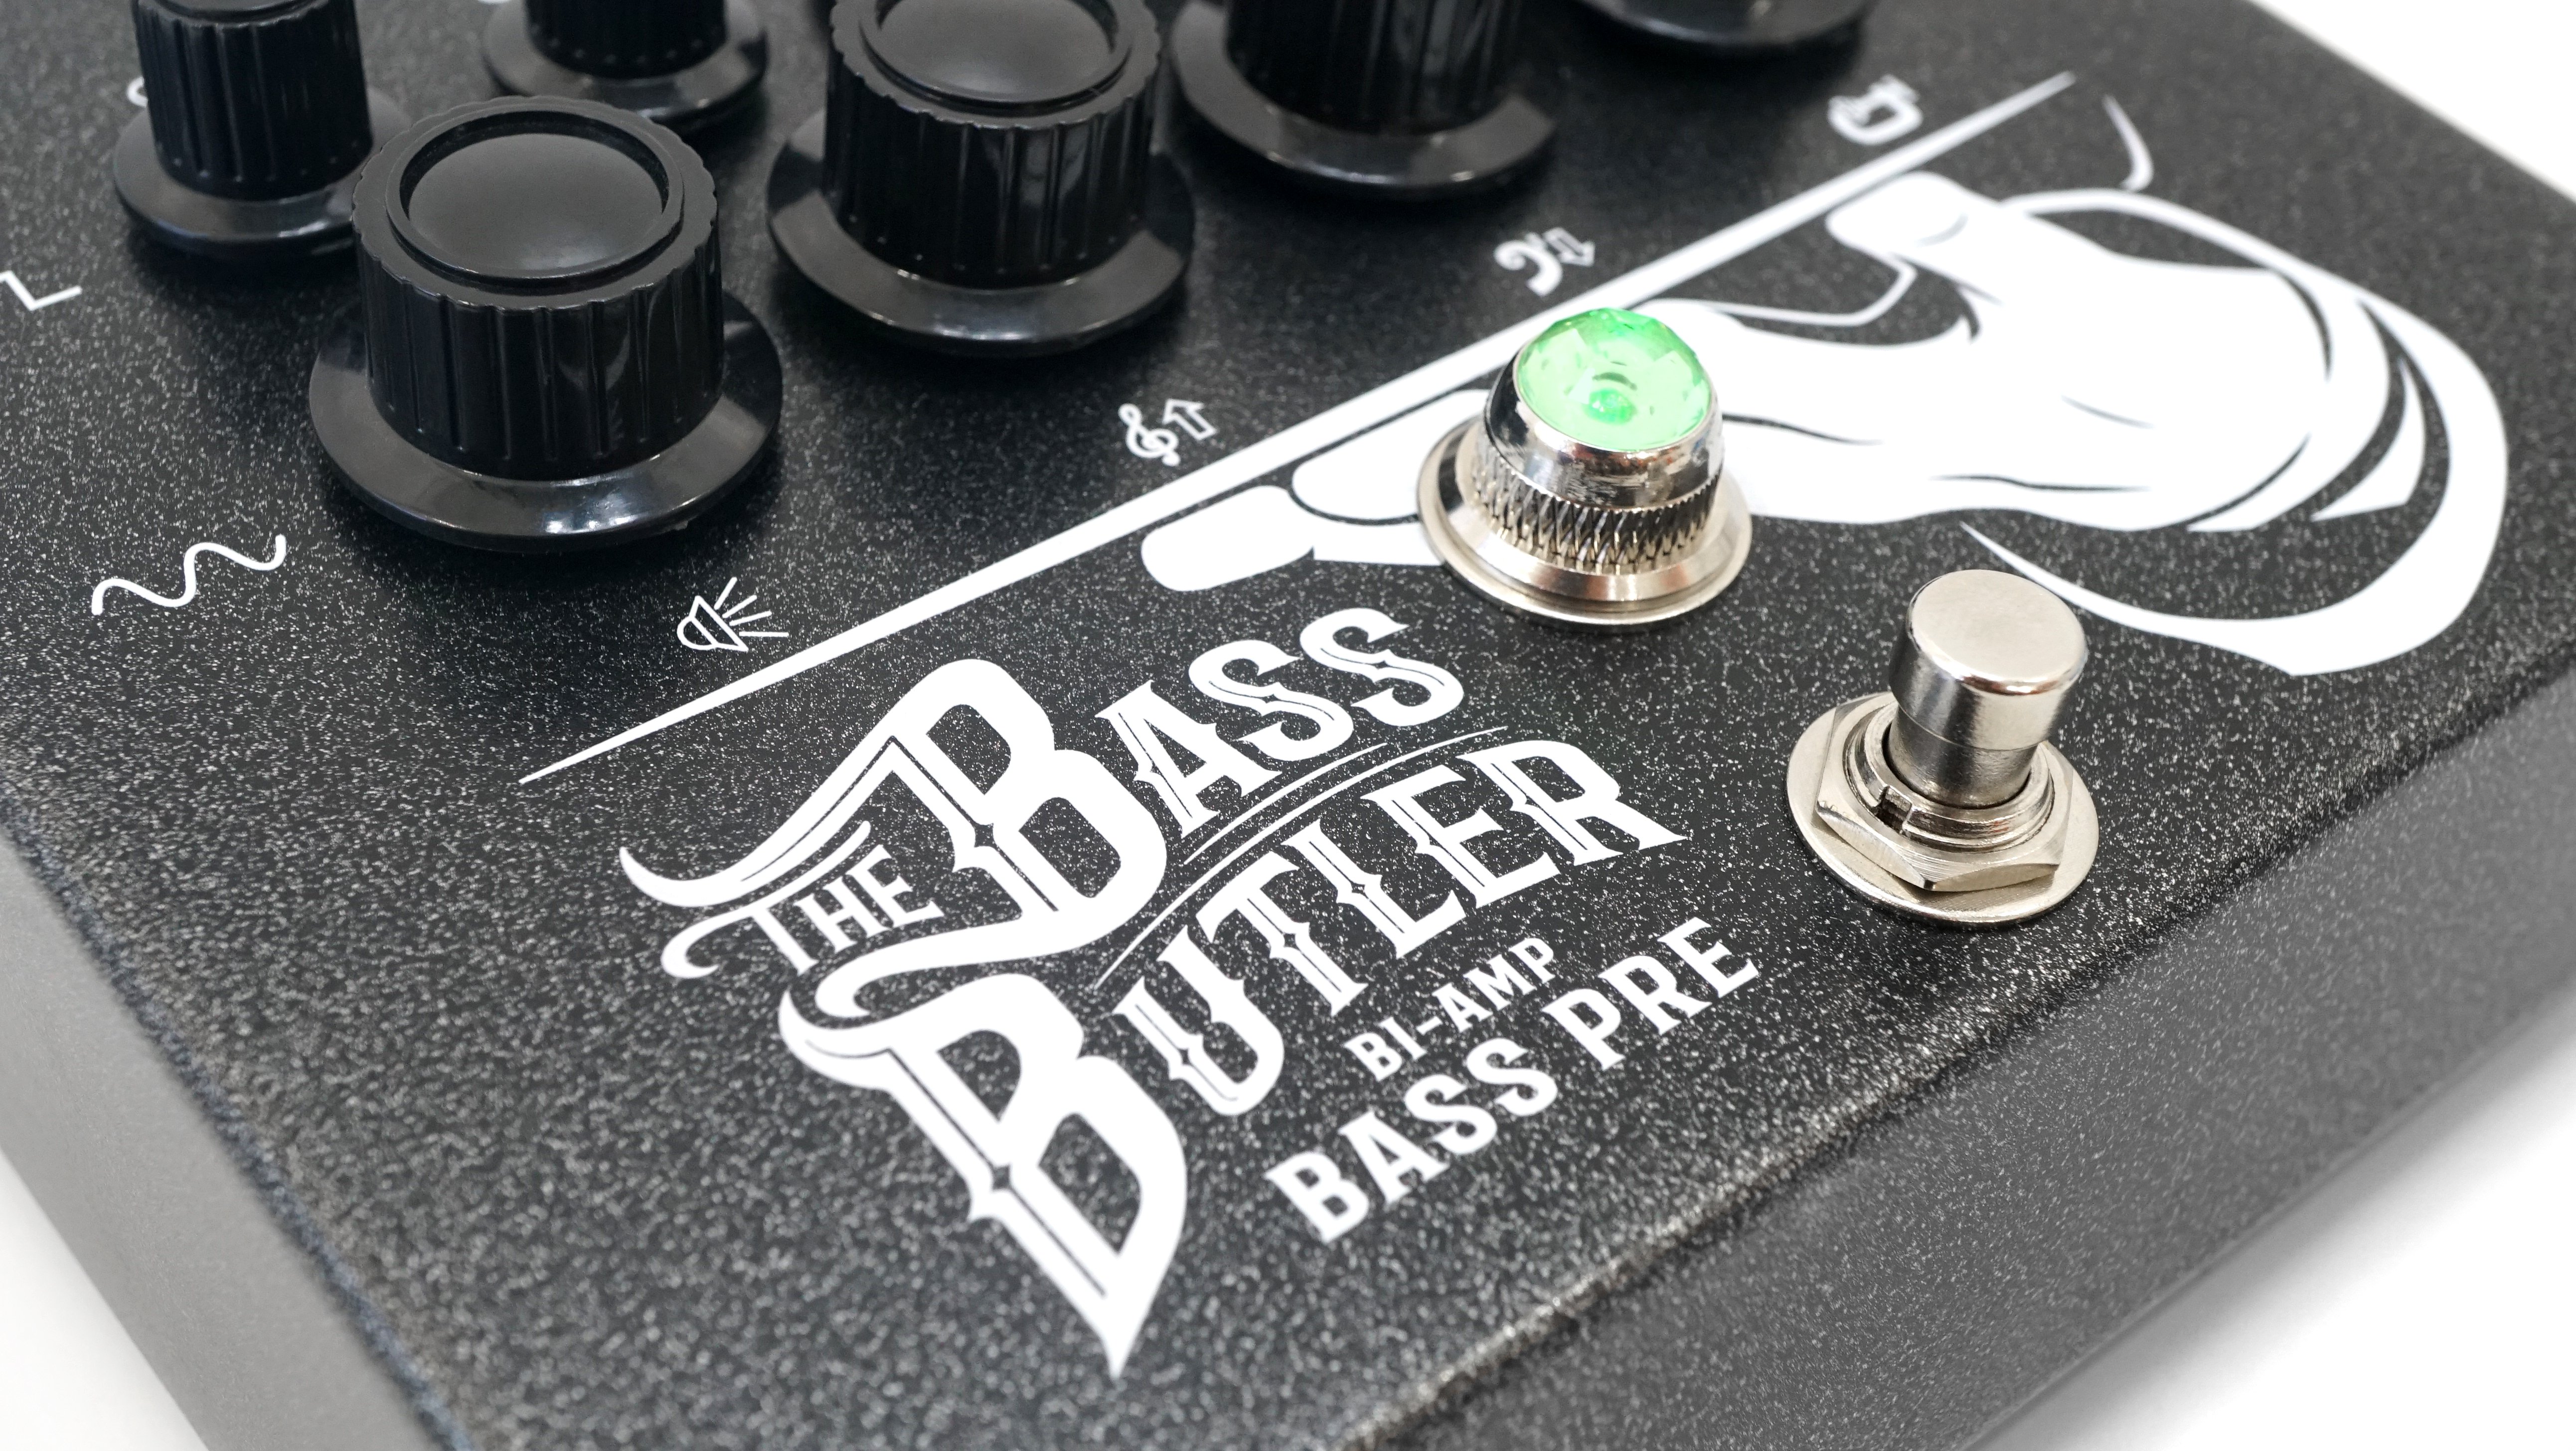 Introducing The Bass Butler Orange Amps